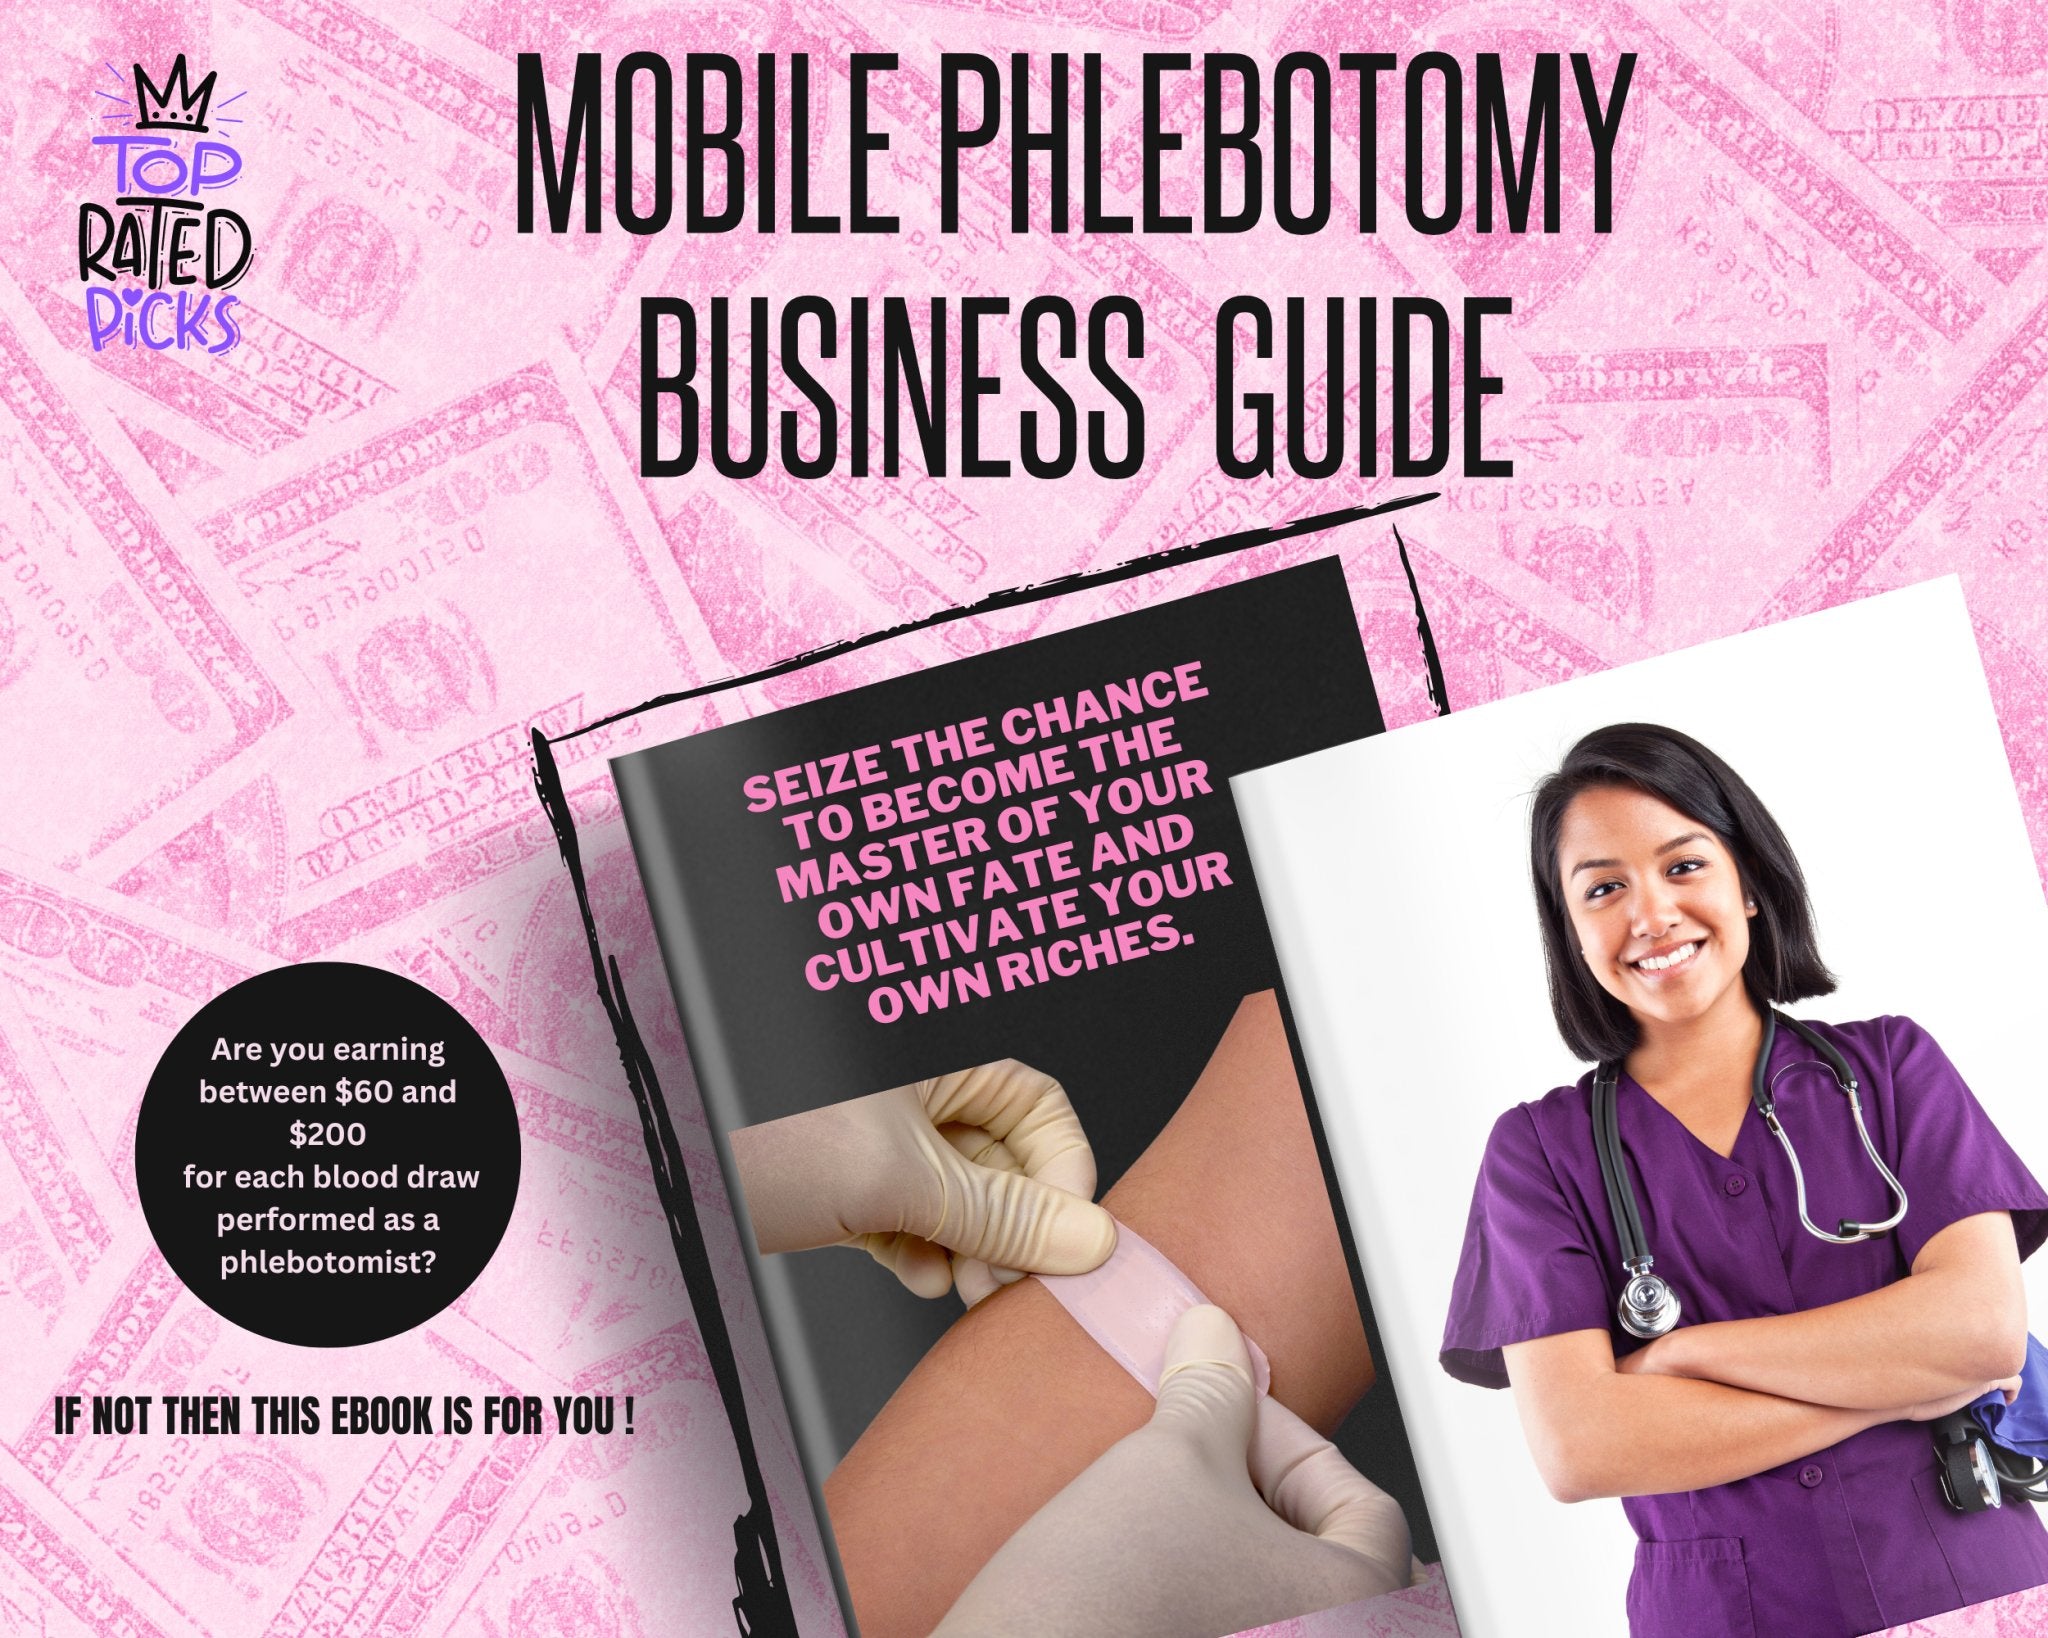 Mobile Phlebotomy Ebook -Guide (DIGITAL FILE PLEASE PROVIDE EMAIL) - Ebookcentral81